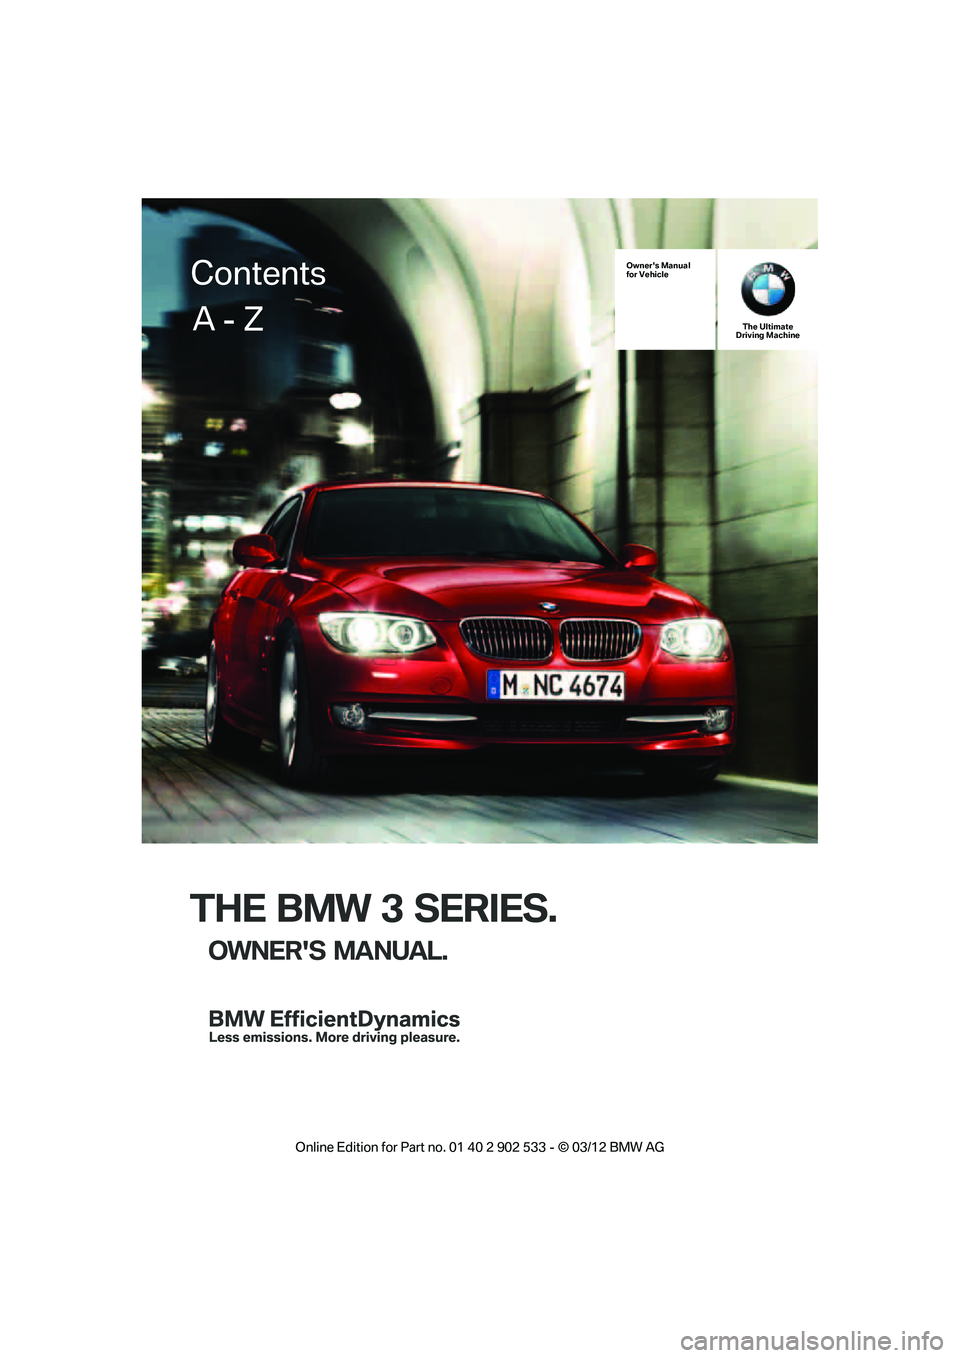 BMW 328I COUPE 2013  Owners Manual THE BMW 3 SERIES.
OWNERS MANUAL.
Owners Manual
for VehicleThe Ultimate
Driving Machine
Contents
A - Z

00320051004F004C00510048000300280047004C0057004C005200510003  